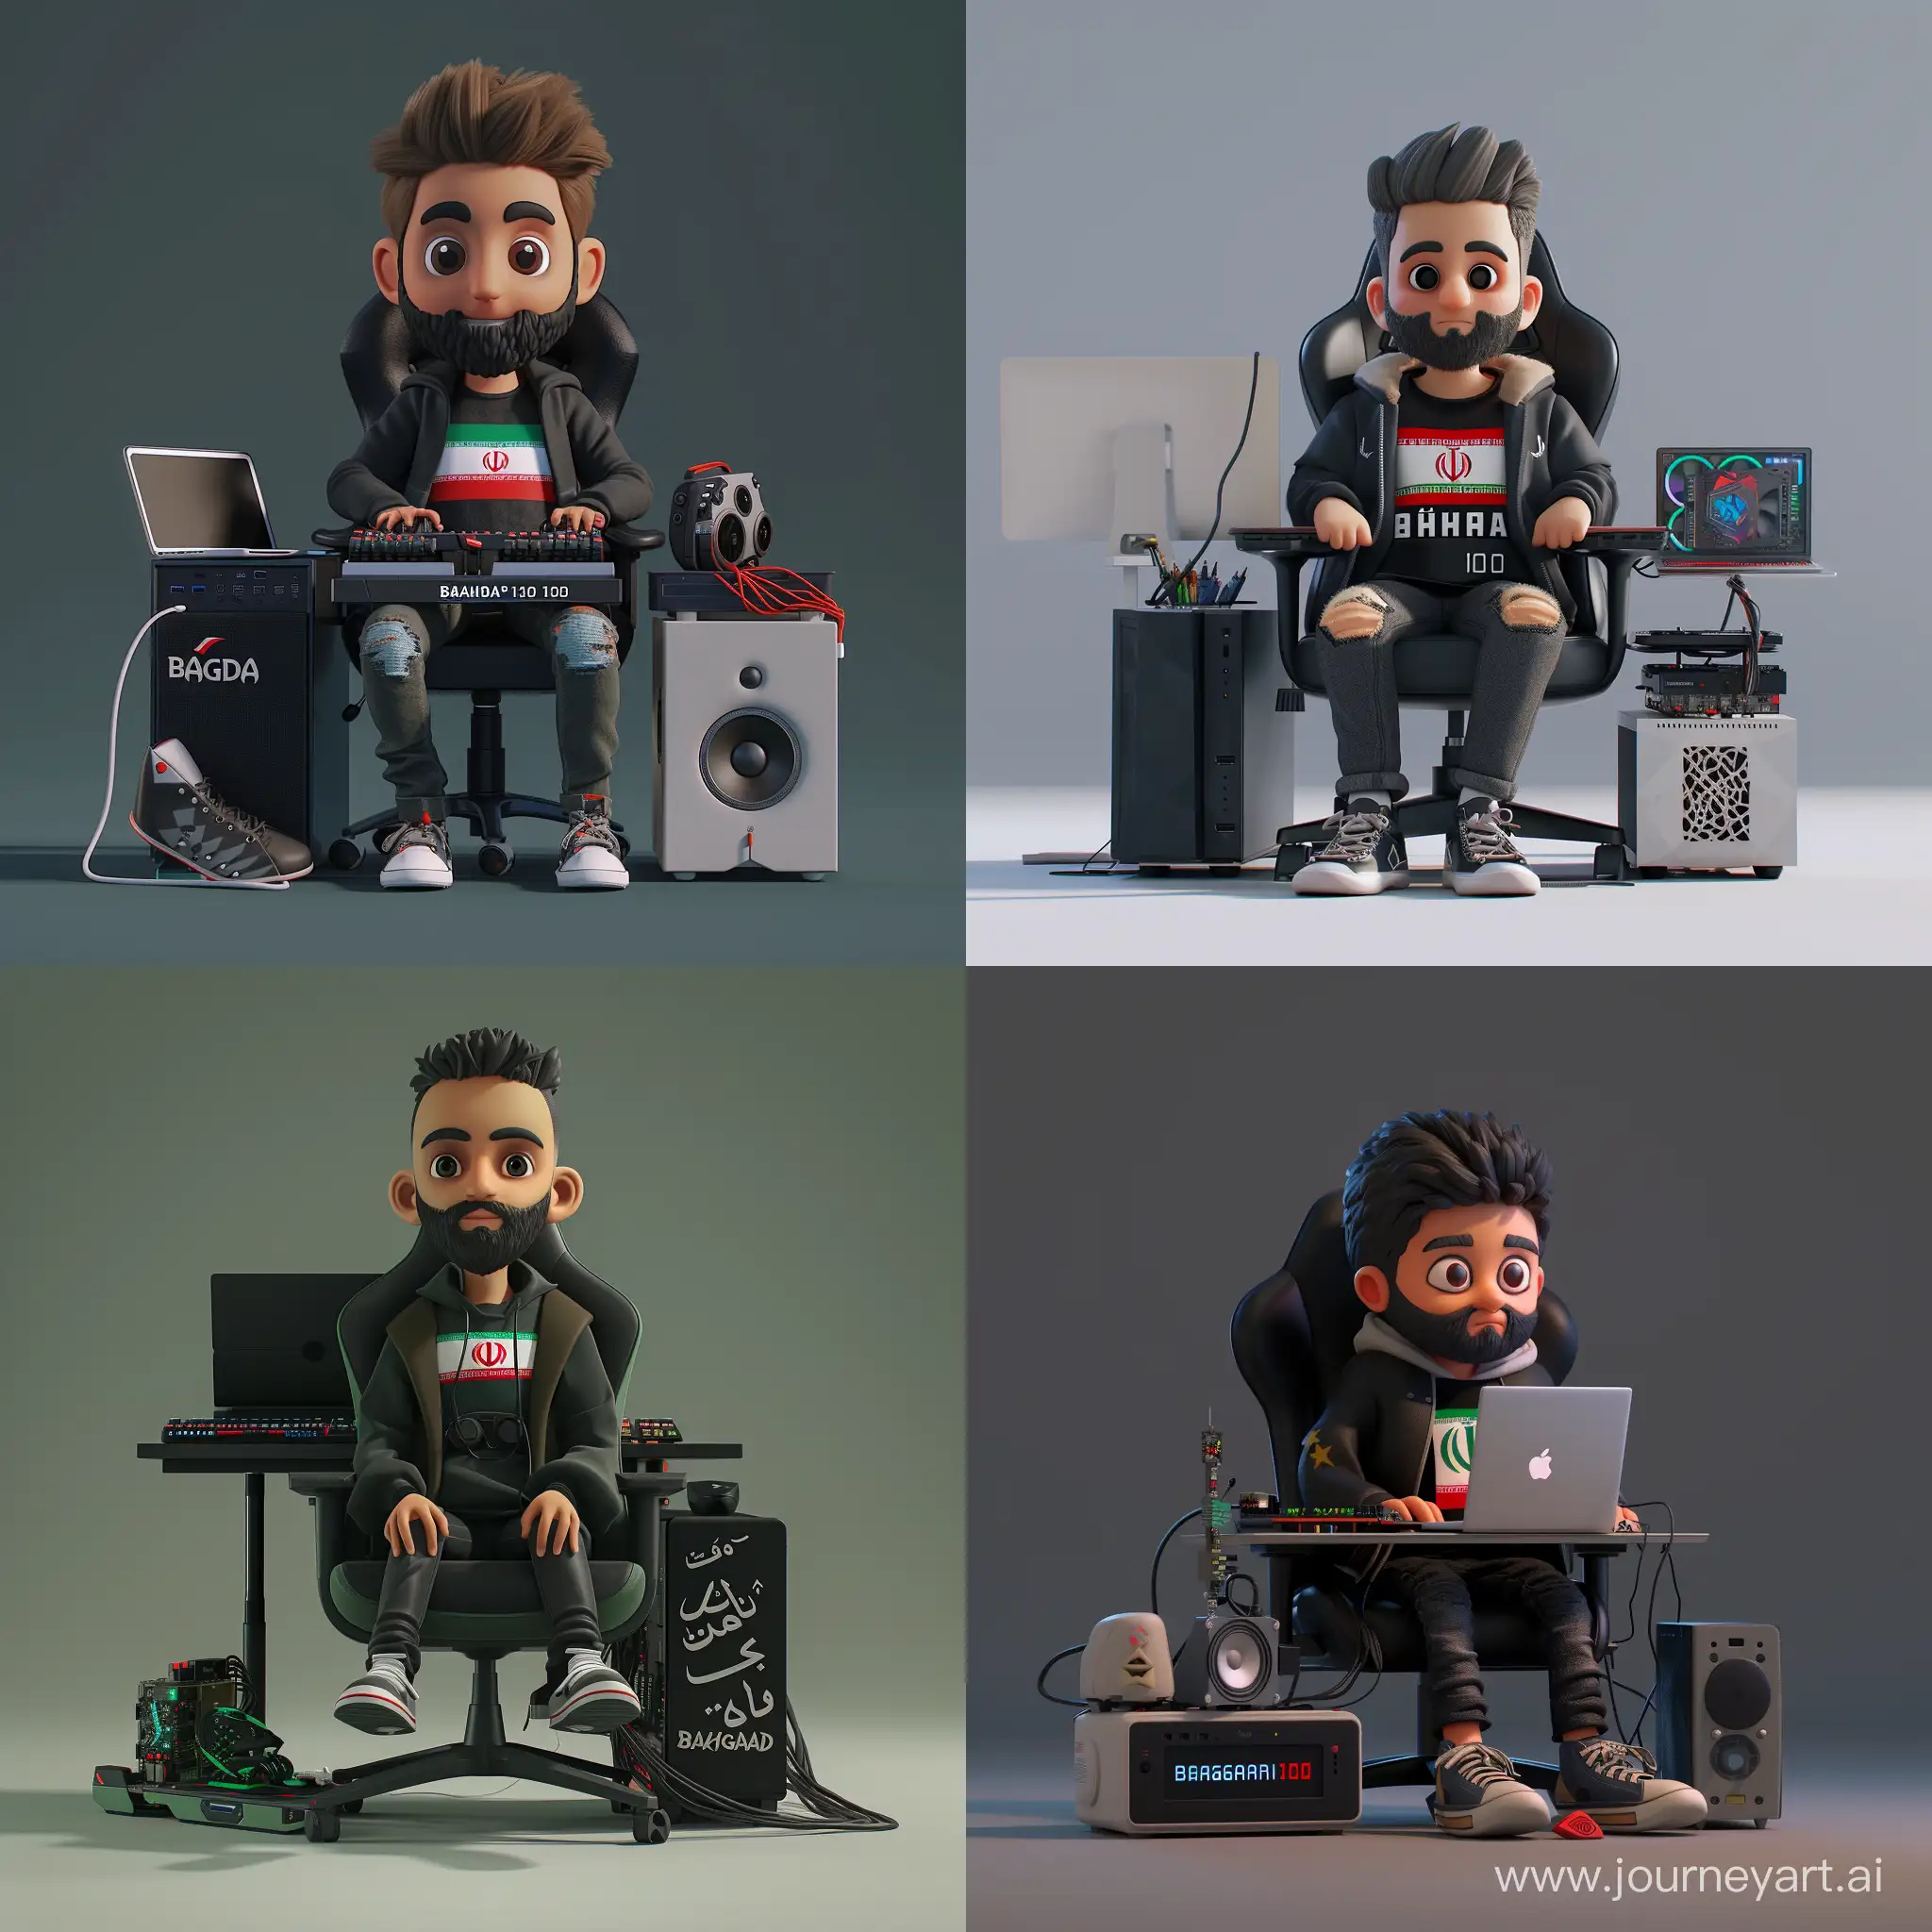 Create a 3D image of a "boy" character sitting on a #gaming chair, behind a #graphics system and a laptop, wearing a black jacket with sneakers, with a short beard, with the Iranian flag on his shirt, BAGHDAD120 written on his shirt